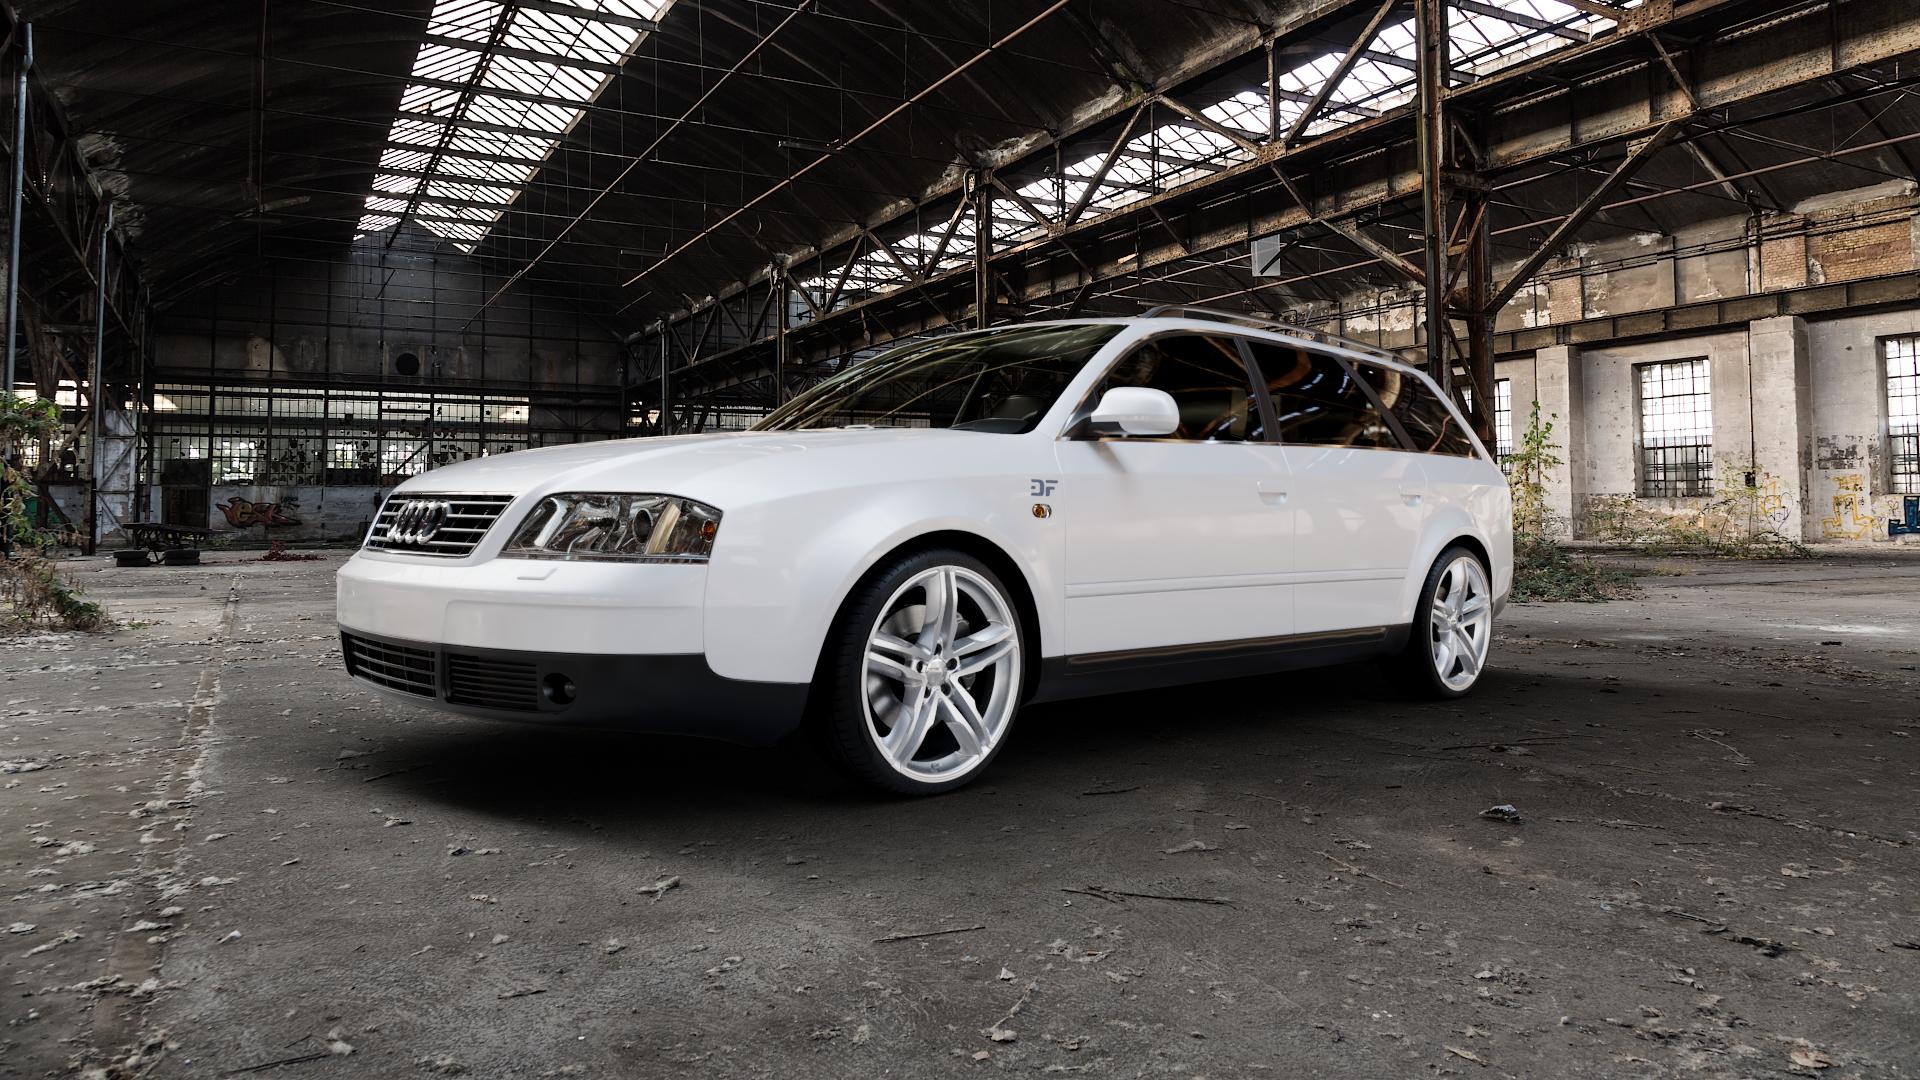 Audi A6 Type 4B/C5 (Avant) 3,7l 191kW (260 hp) Wheels and Tyre Packages |  velonity.com